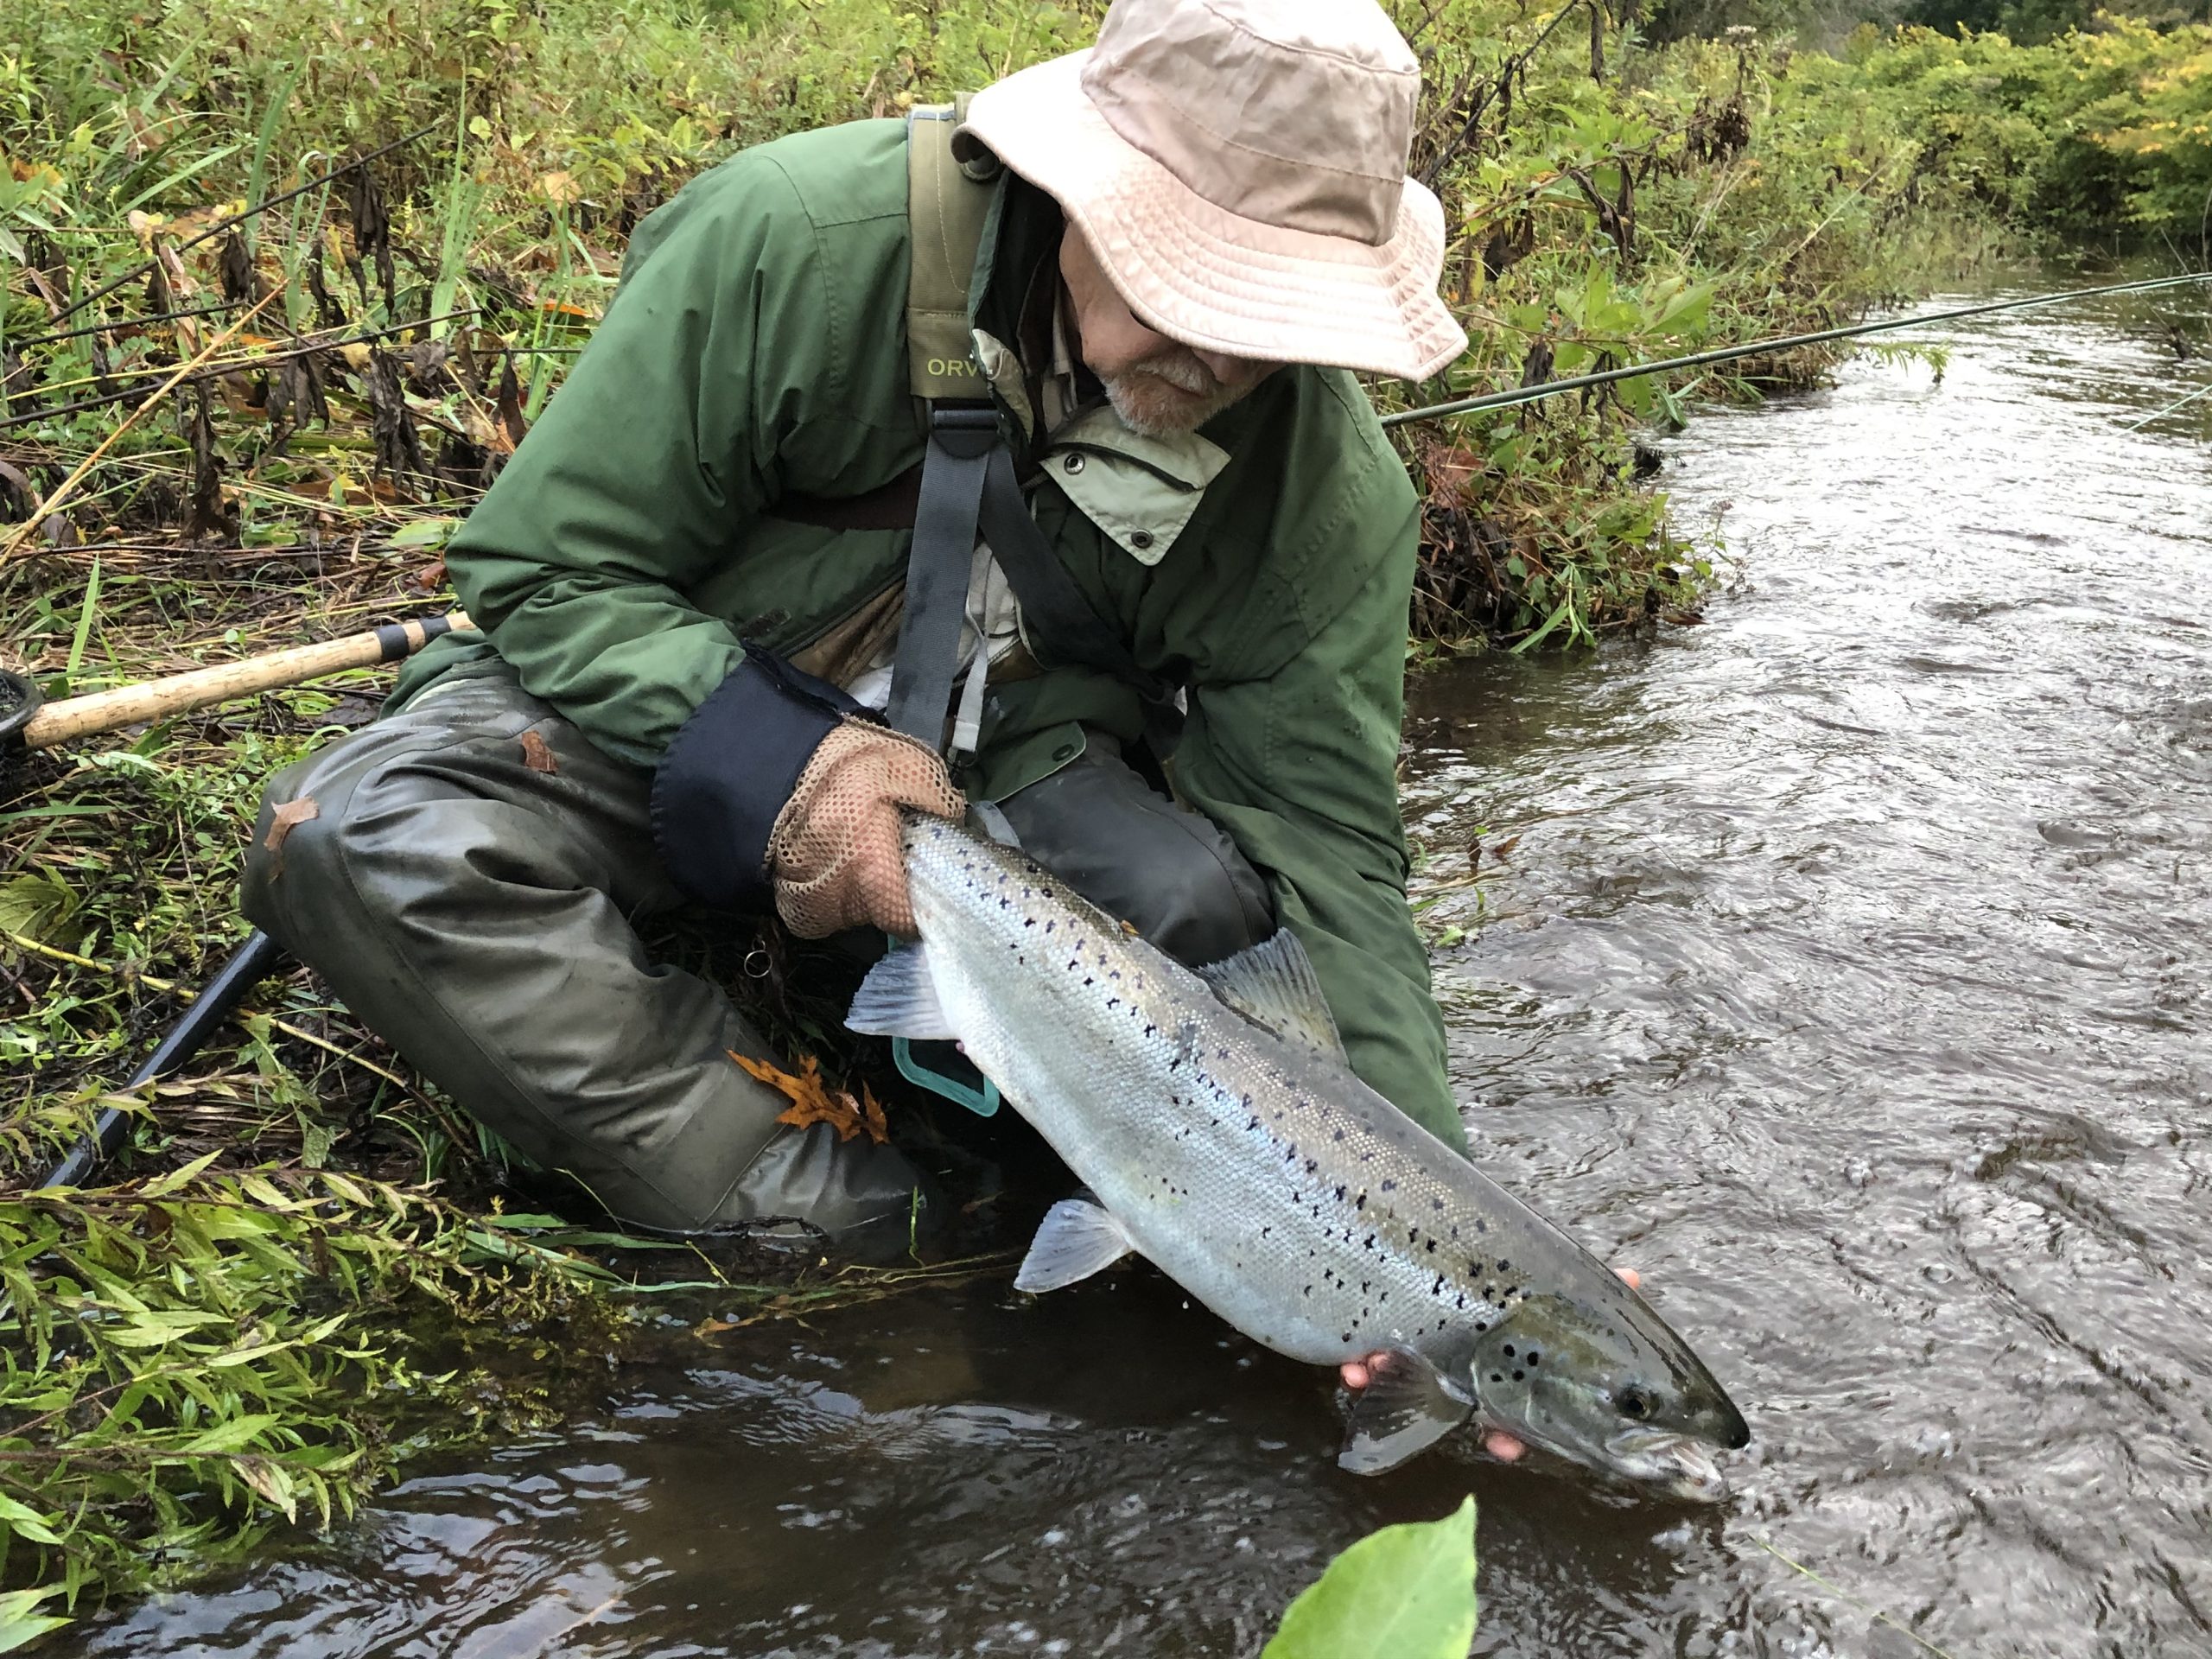 Upstate and Western New York Fishing Report-May 26, 2022 - On The Water